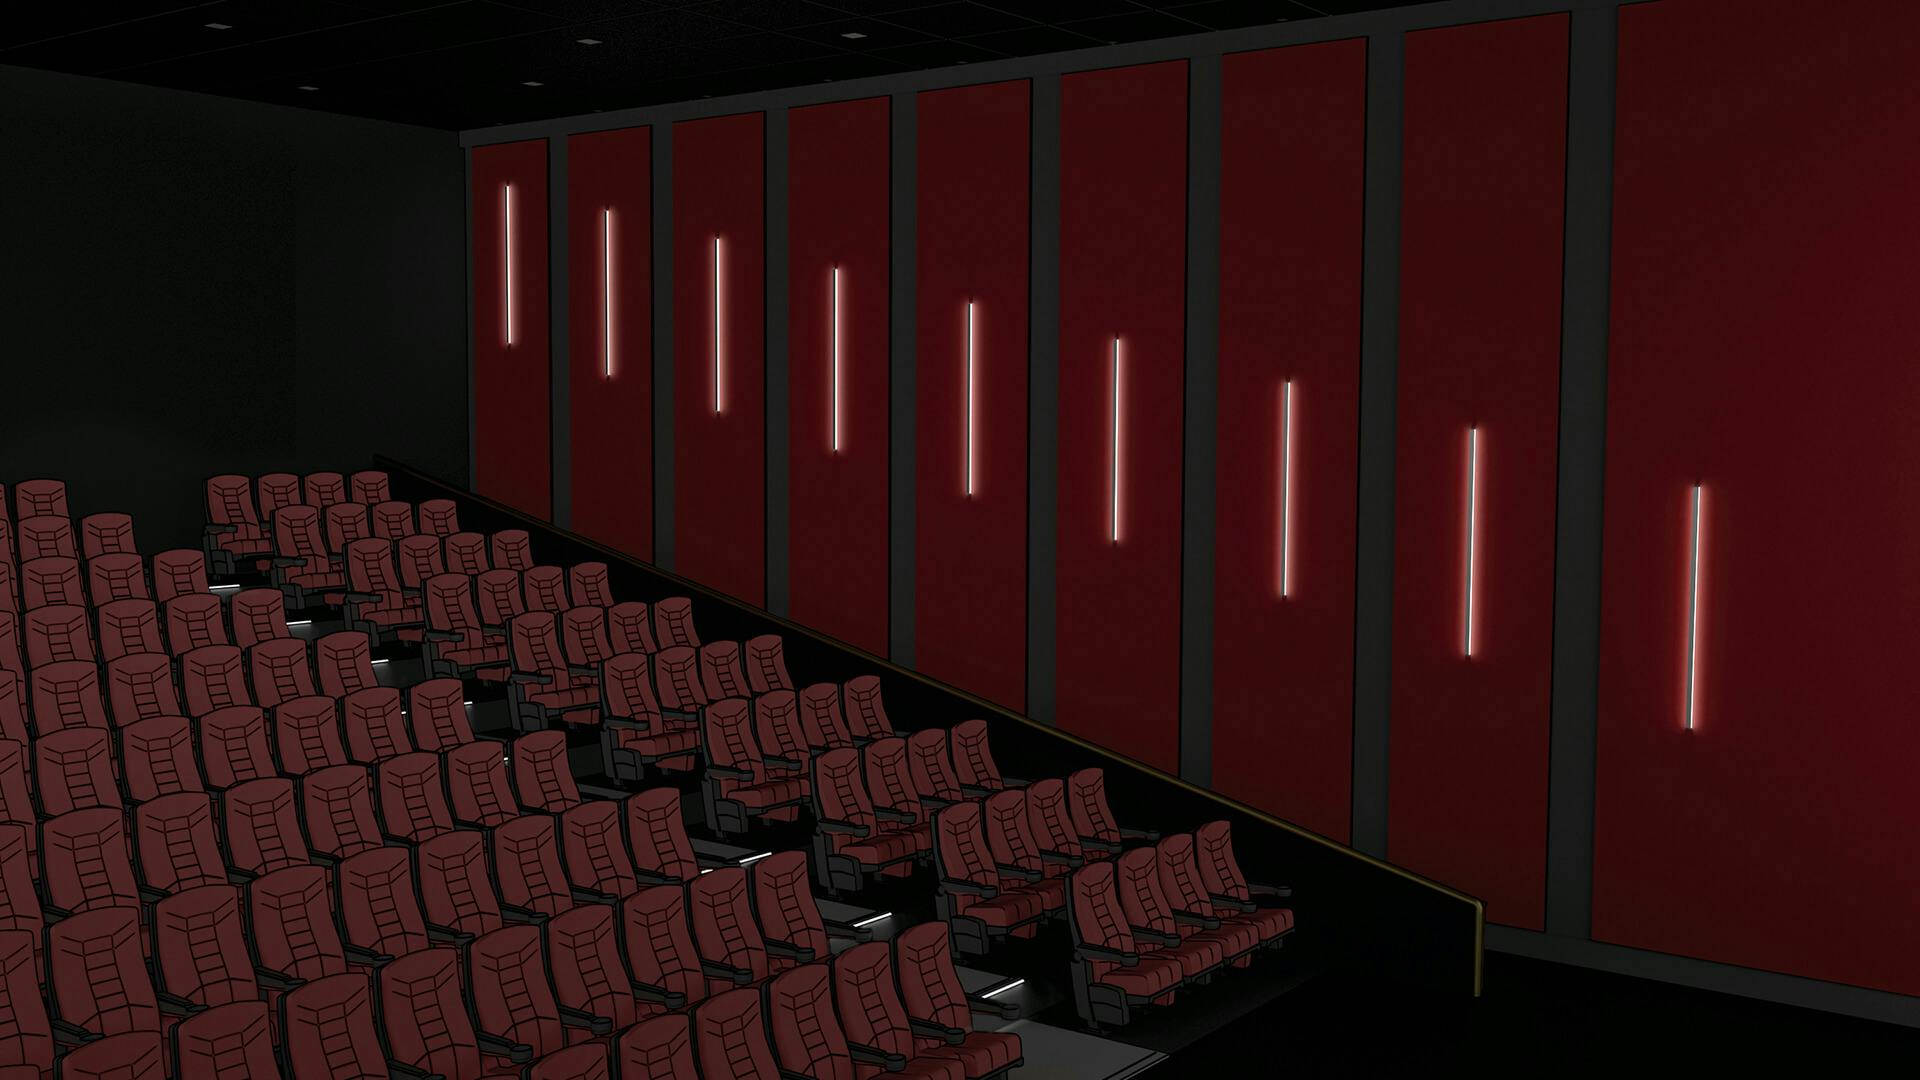 Movie theatre with sconce tape lighting lining the walls